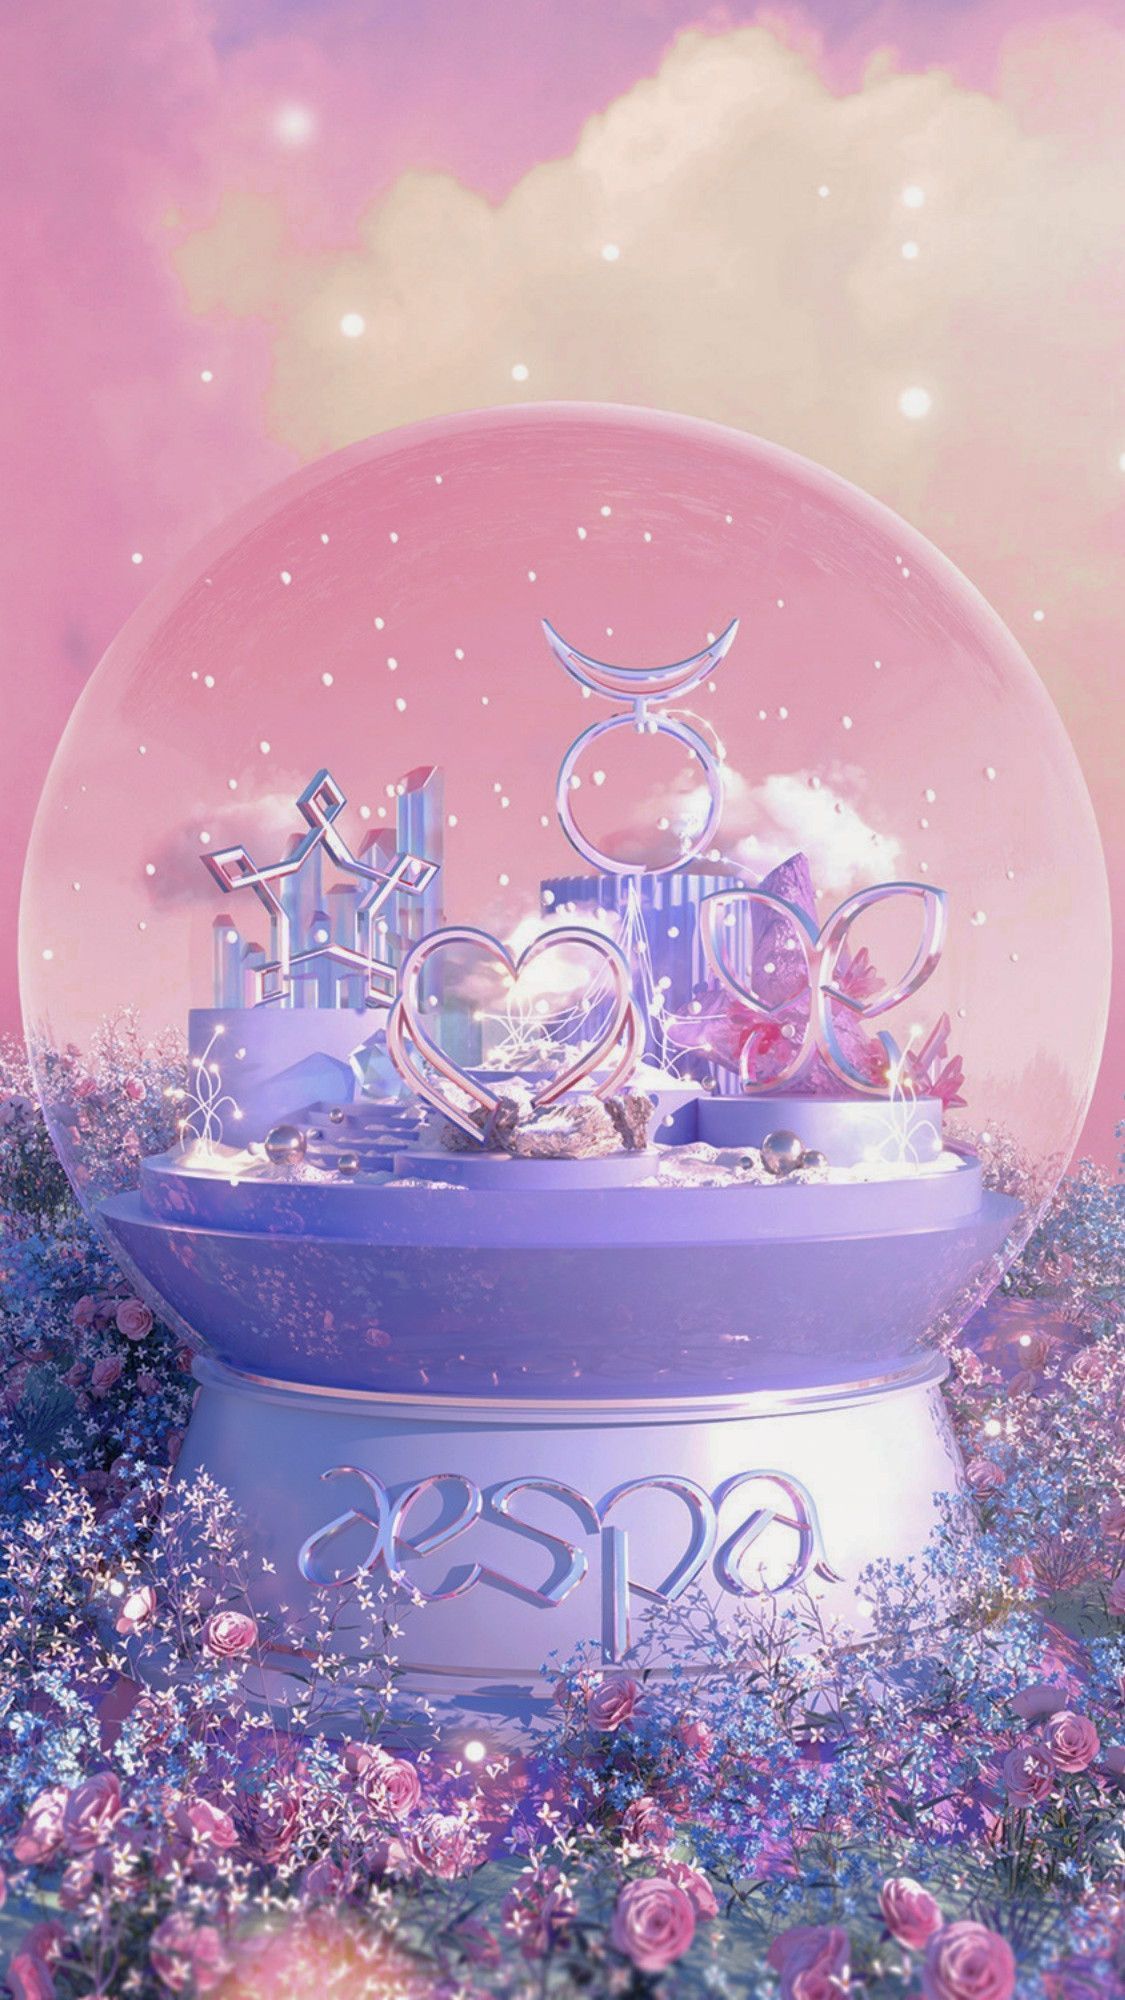 Aesthetic phone wallpaper of a pink and purple castle in a crystal ball - Aespa